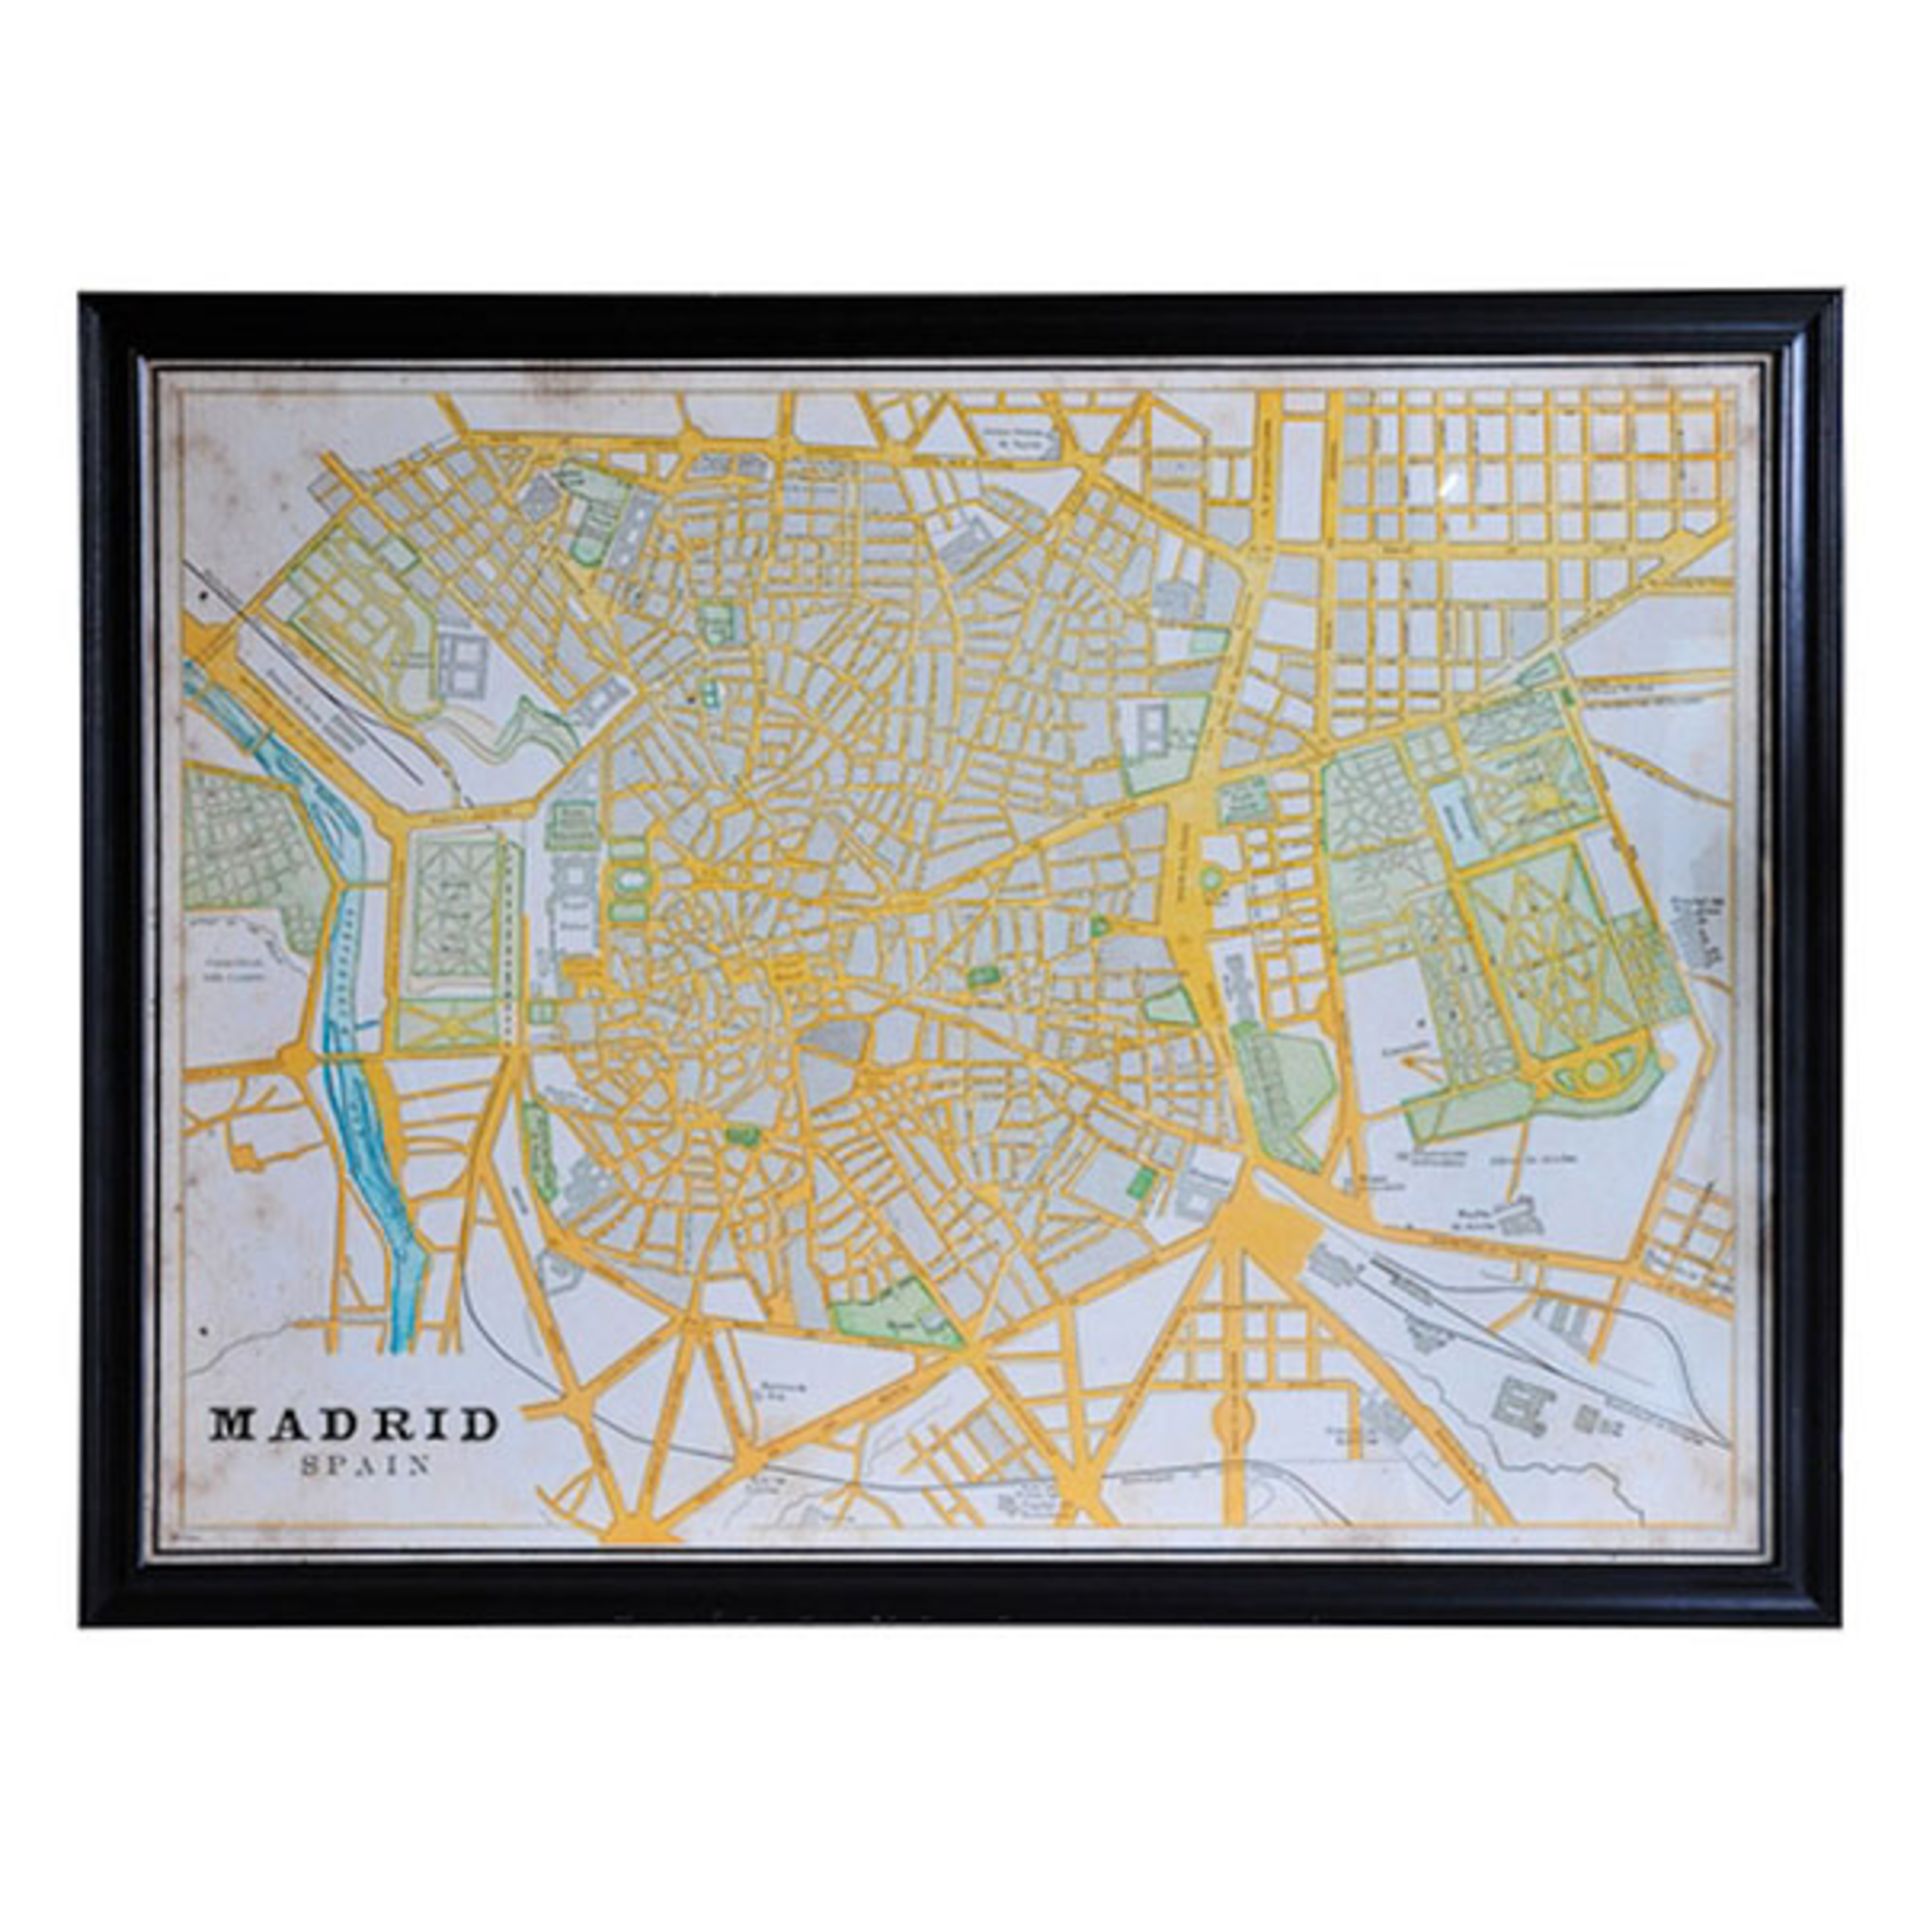 Capital Map Madrid These Unframed City Maps Pay Homage To Each City's History And The Life Stories - Image 2 of 2